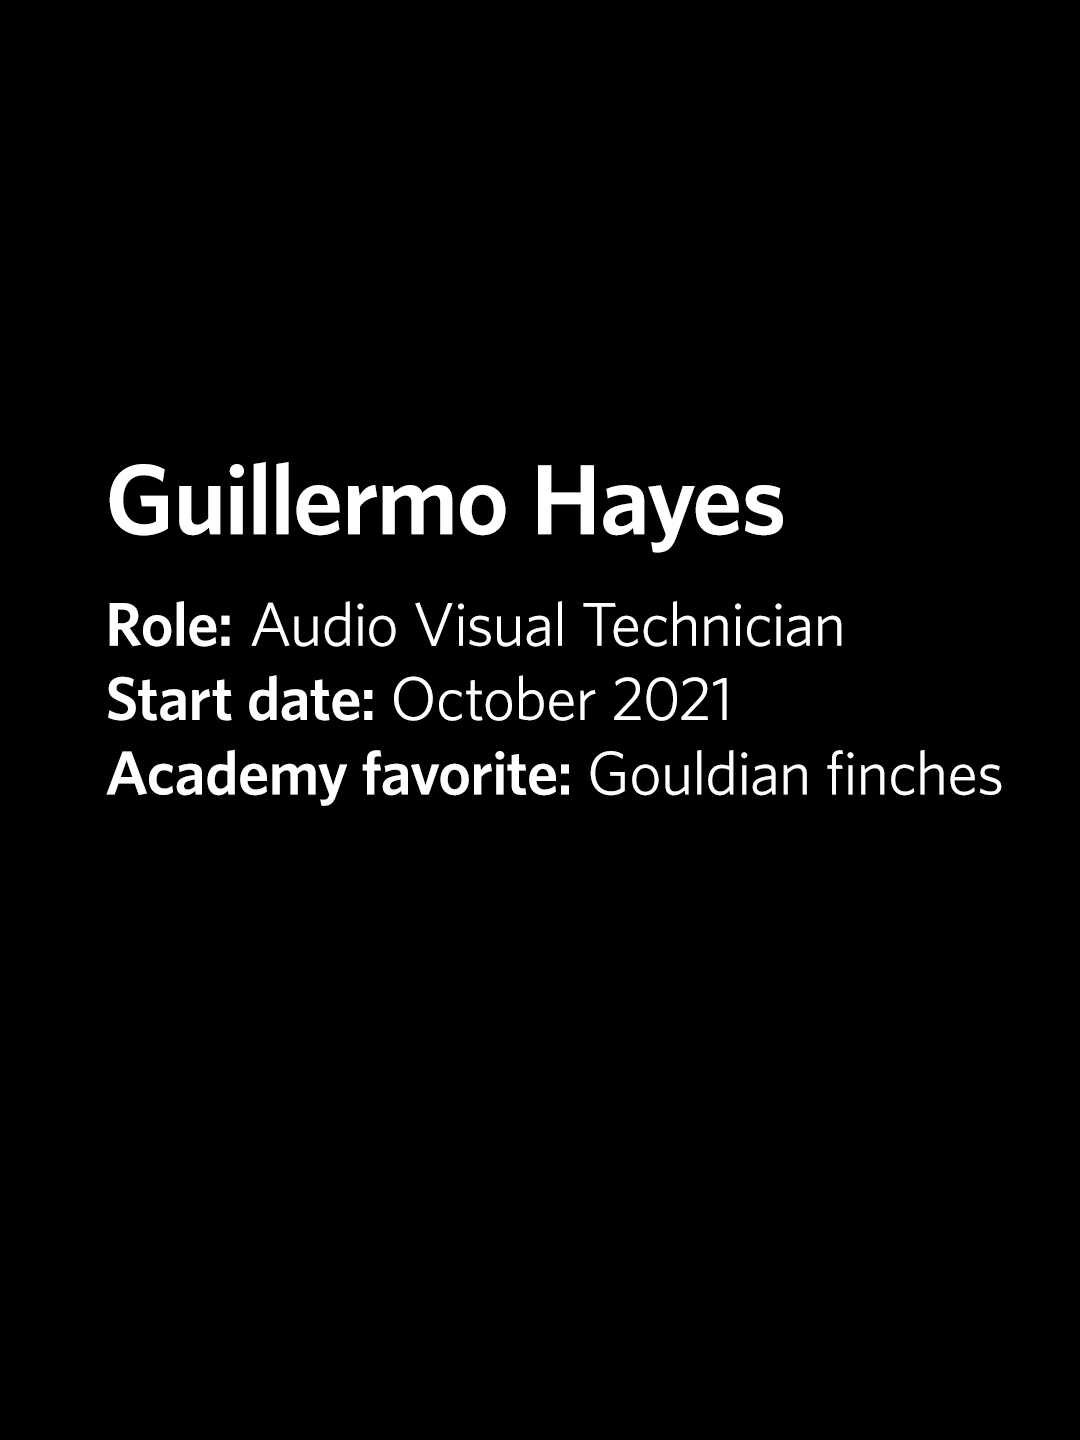 Guillermo Hayes, Audio Visual Technician at the Academy, started October 2021, favorite exhibit is Gouldian finches